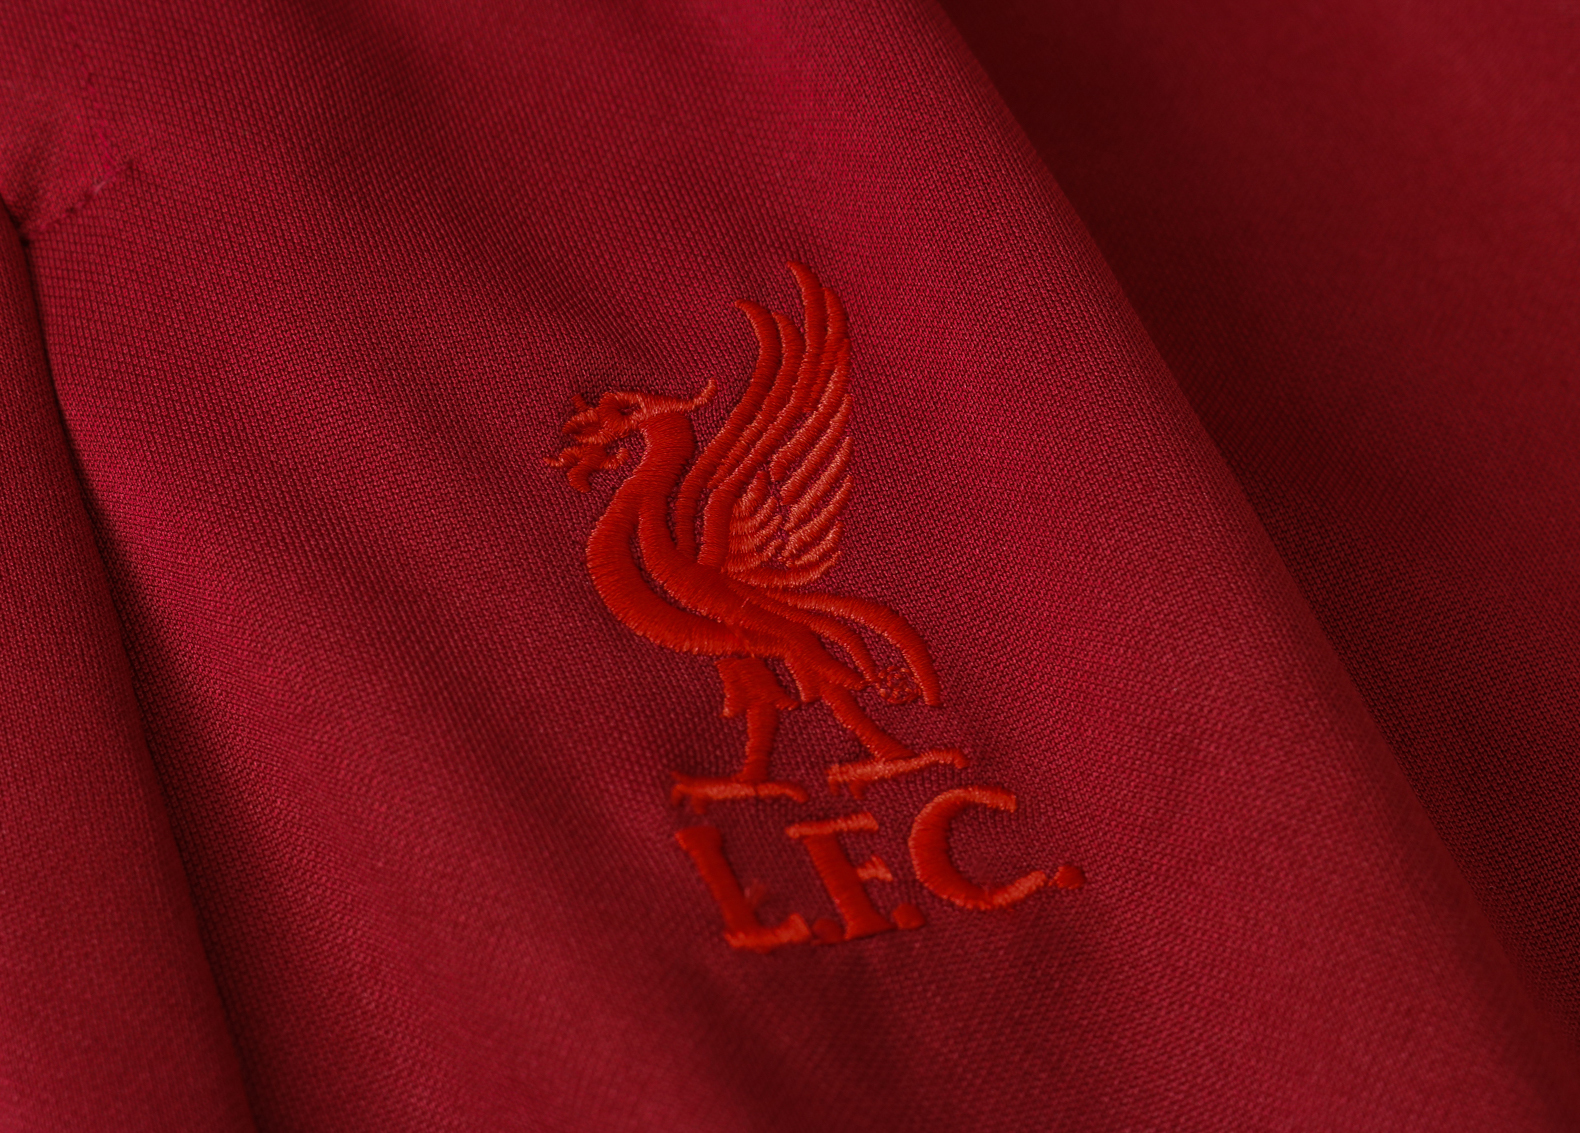 Liverpool Tracksuit Pants 2020 2021 – Red